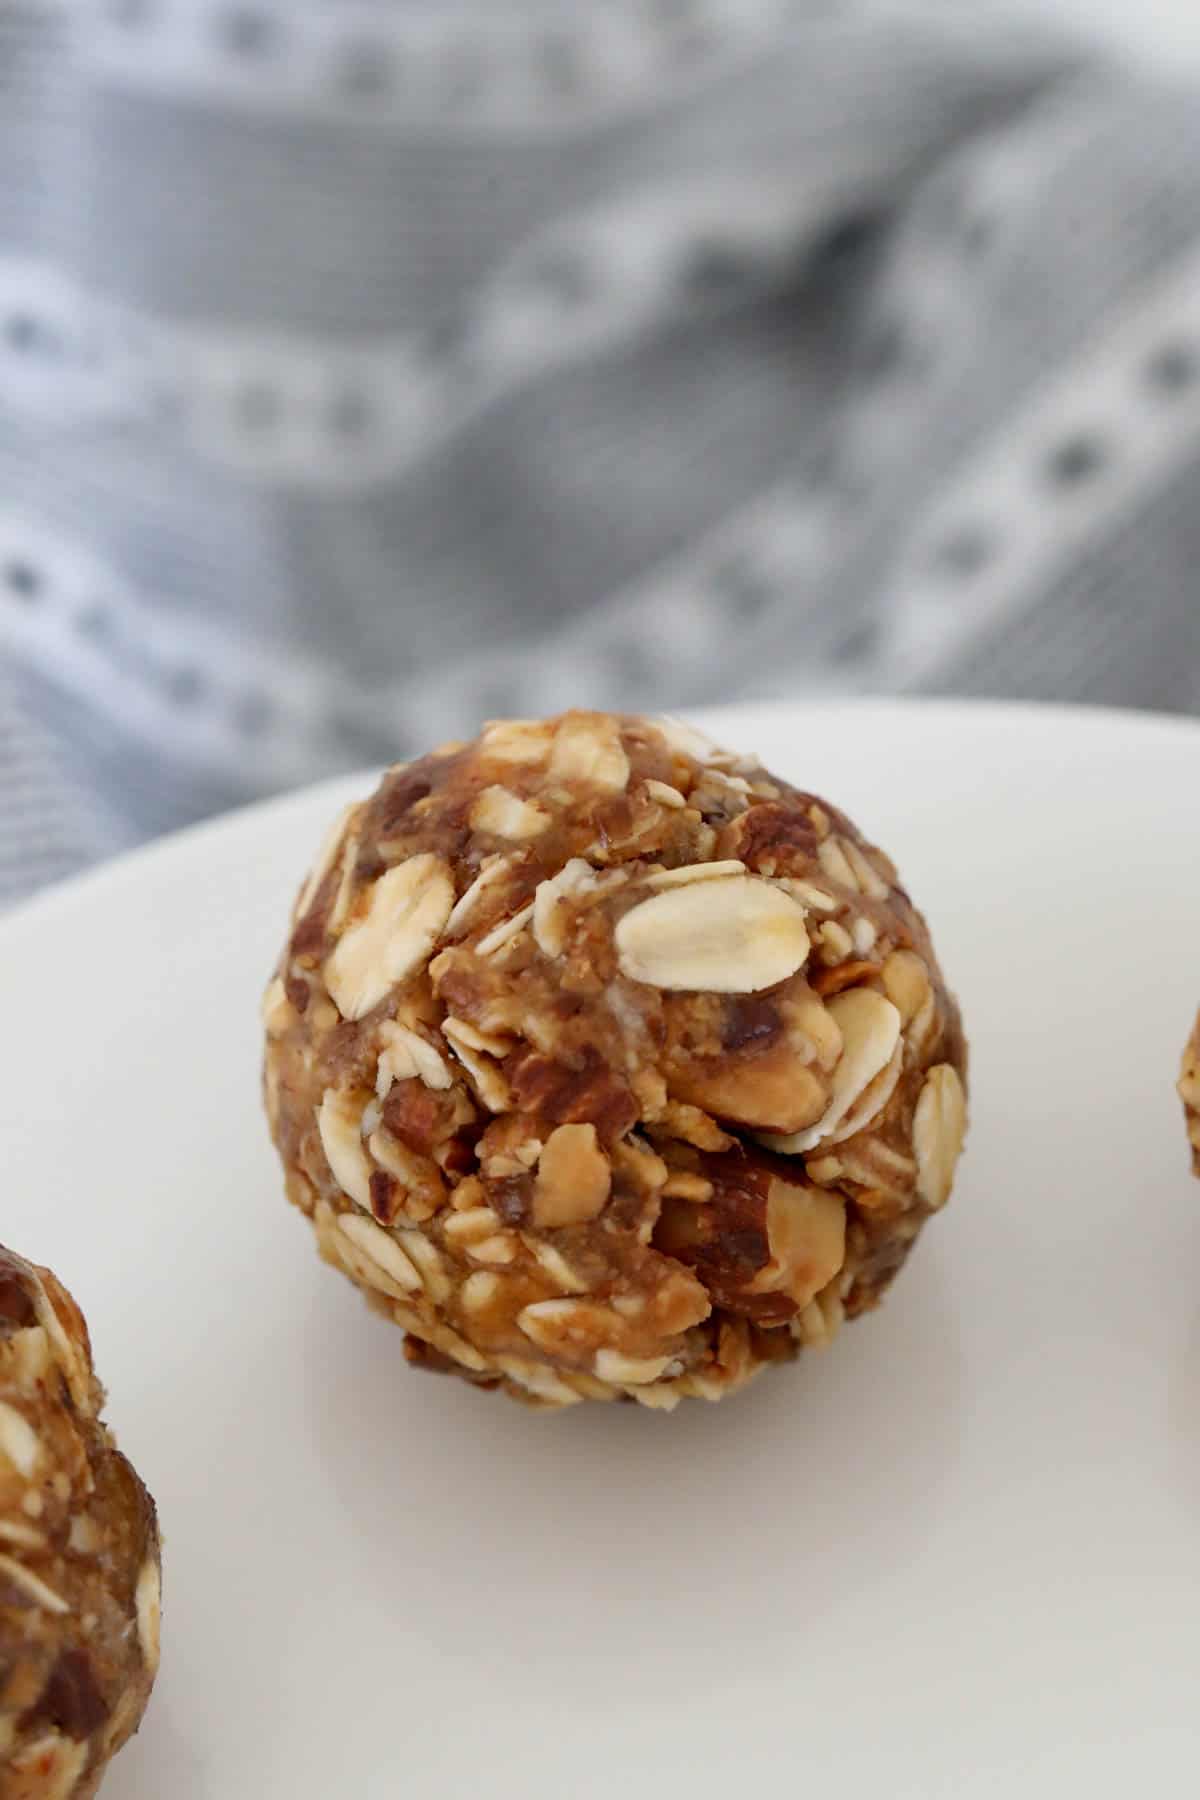 A close up showing oats and chopped almonds rolled into a ball.